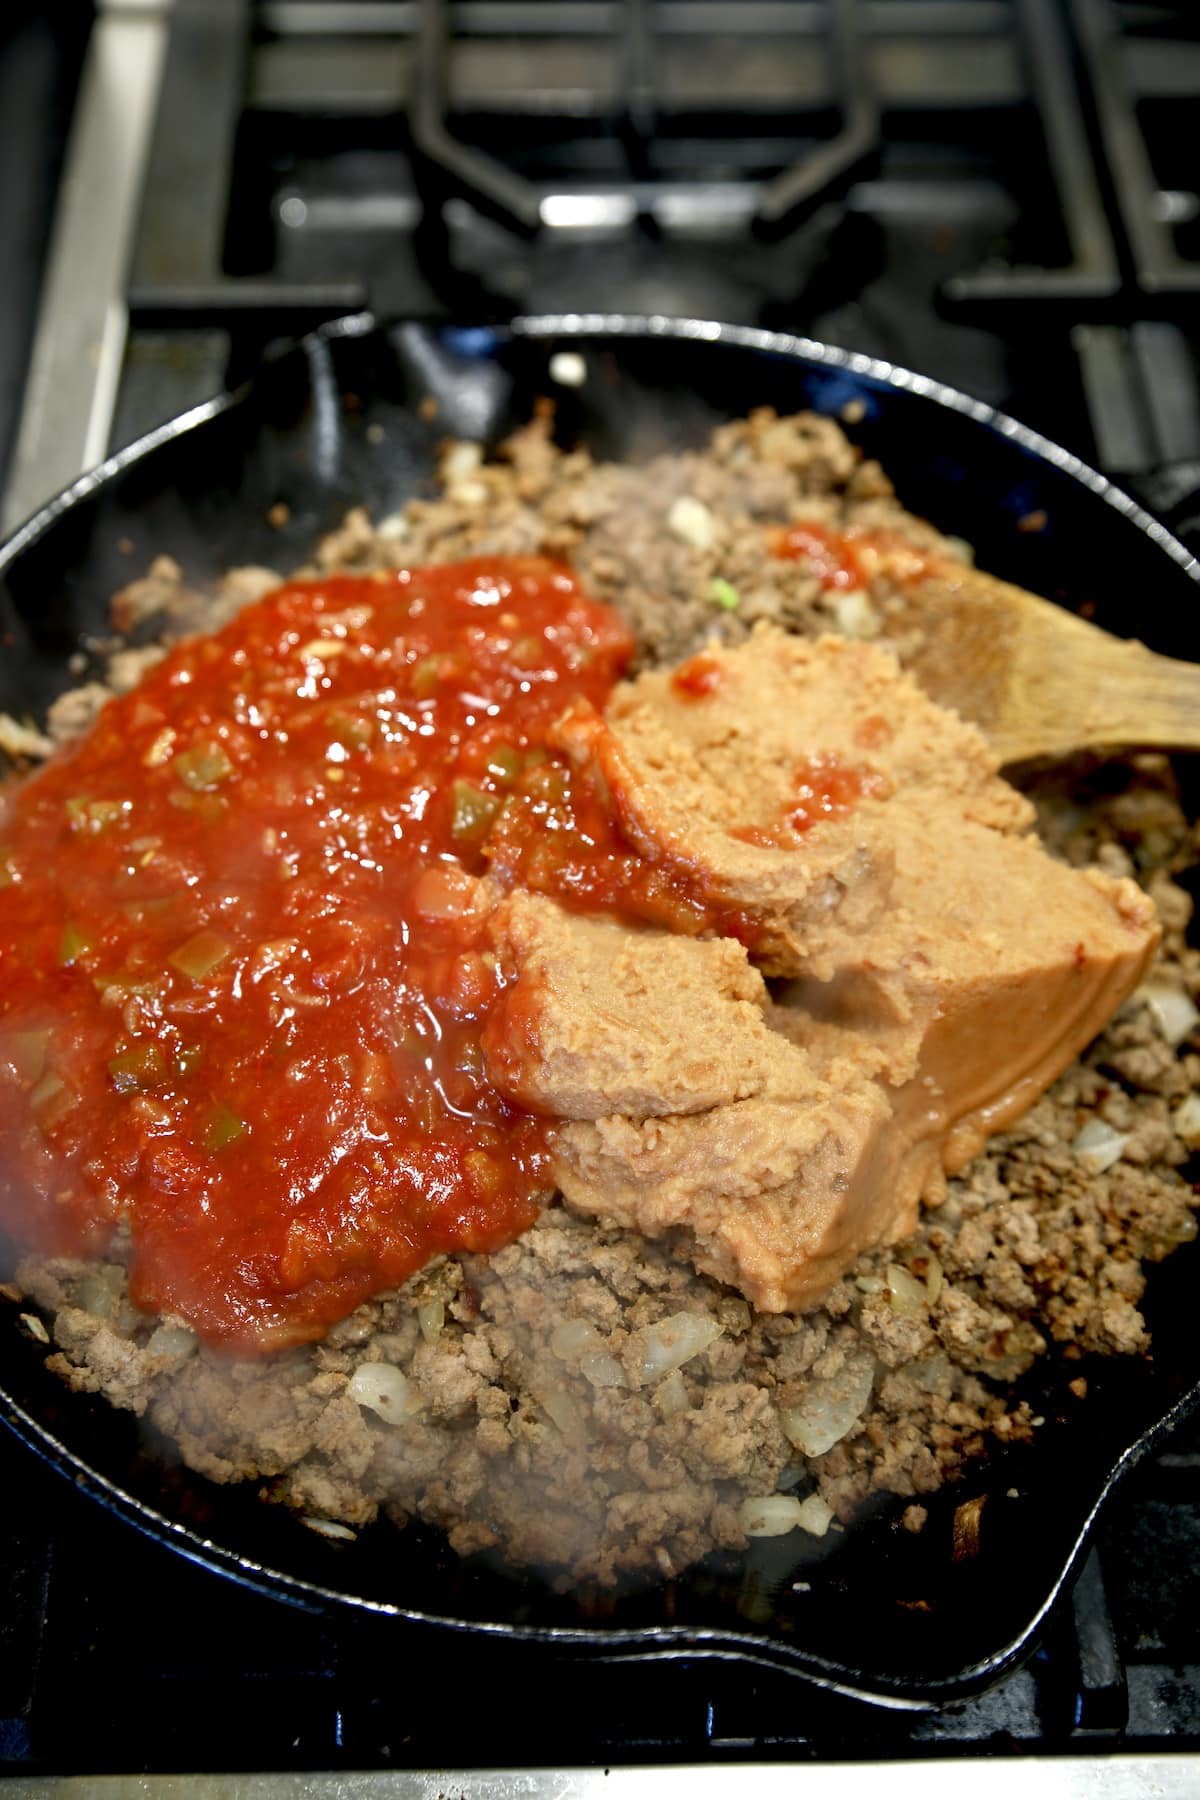 Adding picante sauce and refried beans to ground beef in a skillet.